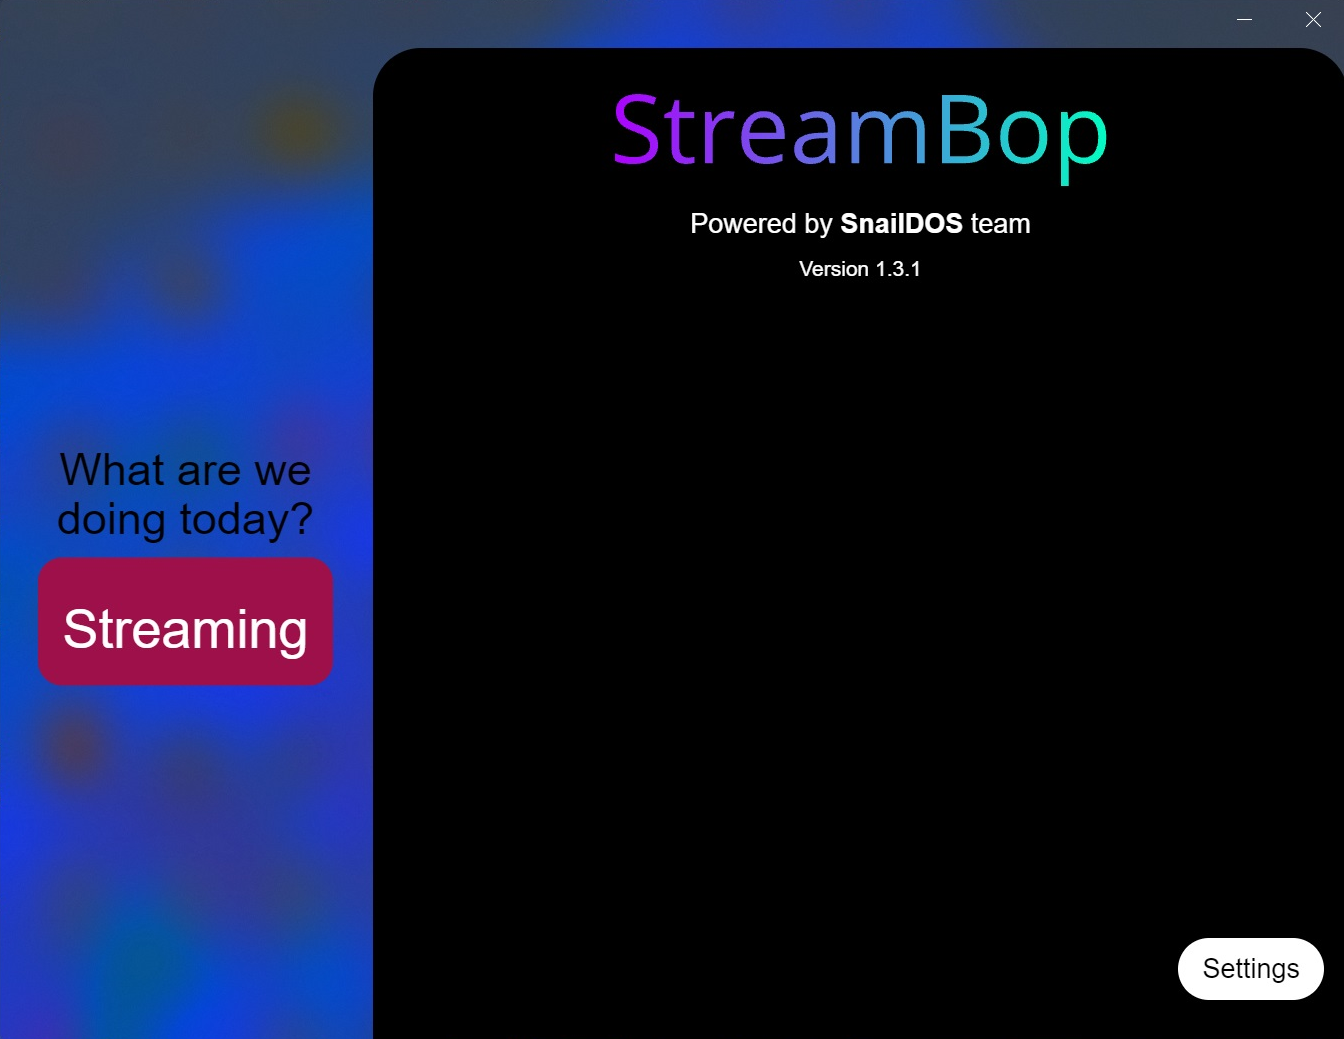 StreamBop in action